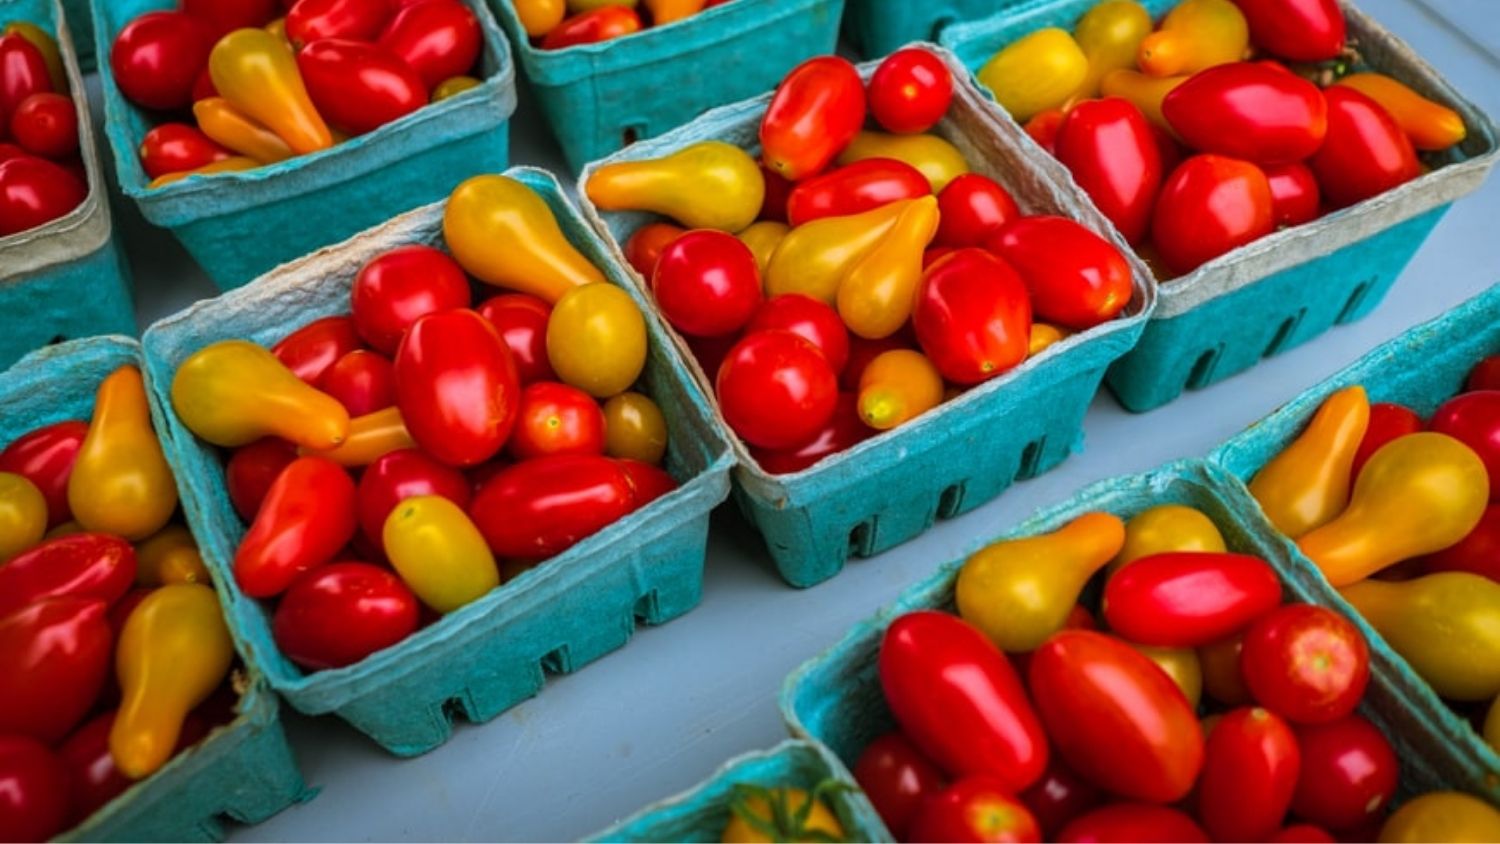 Red and yellow cherry tomatoes - Agritourism Experiences Increase Consumers' Pro-Environmental Behaviors - College of Natural Resources News NC State University